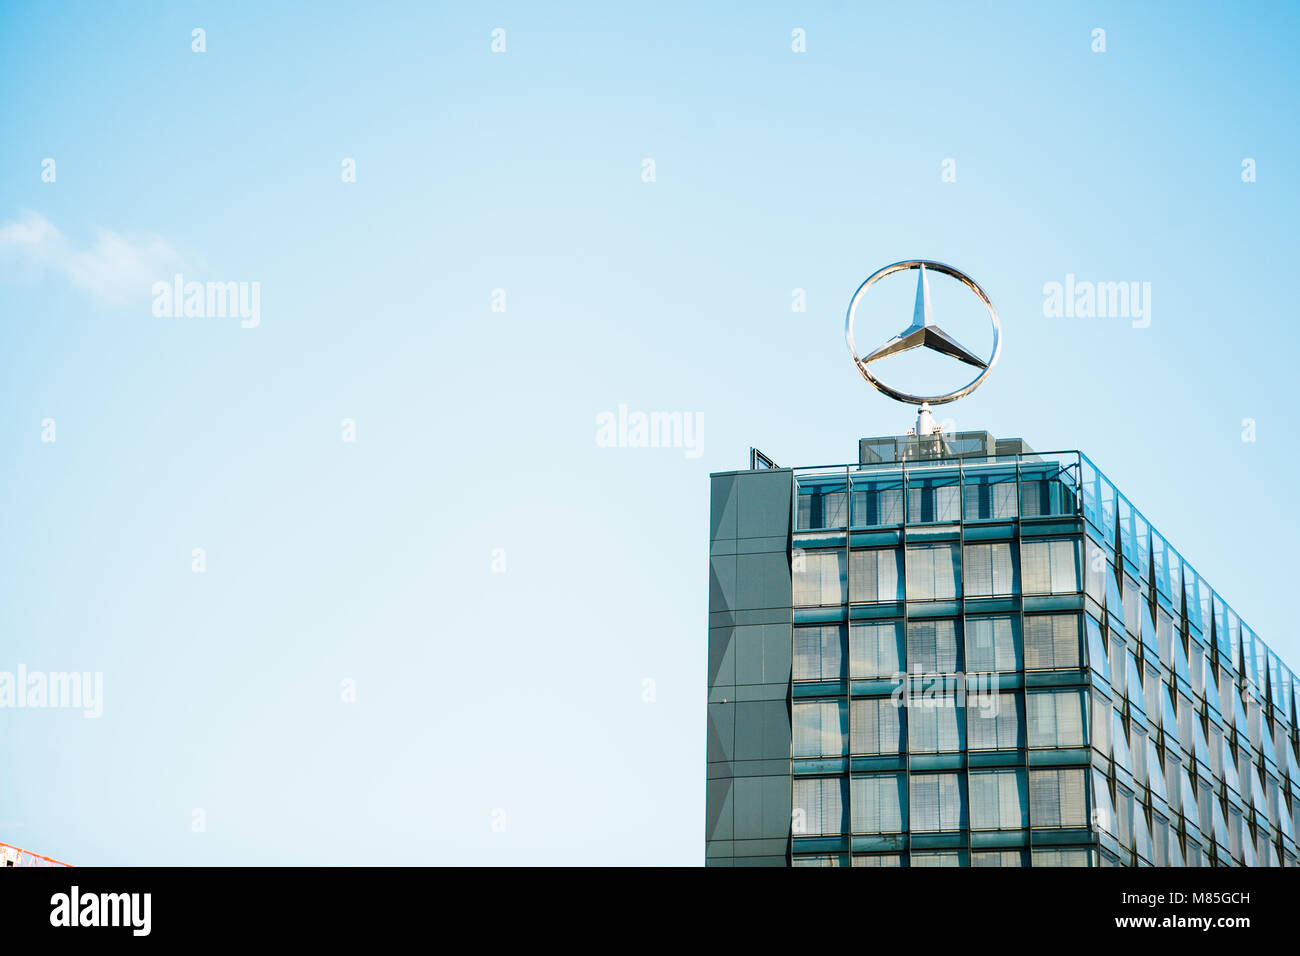 The symbol of Mercedes Benz on the roof of the central office building of the international engineering corporation Mercedes Benz. Stock Photo